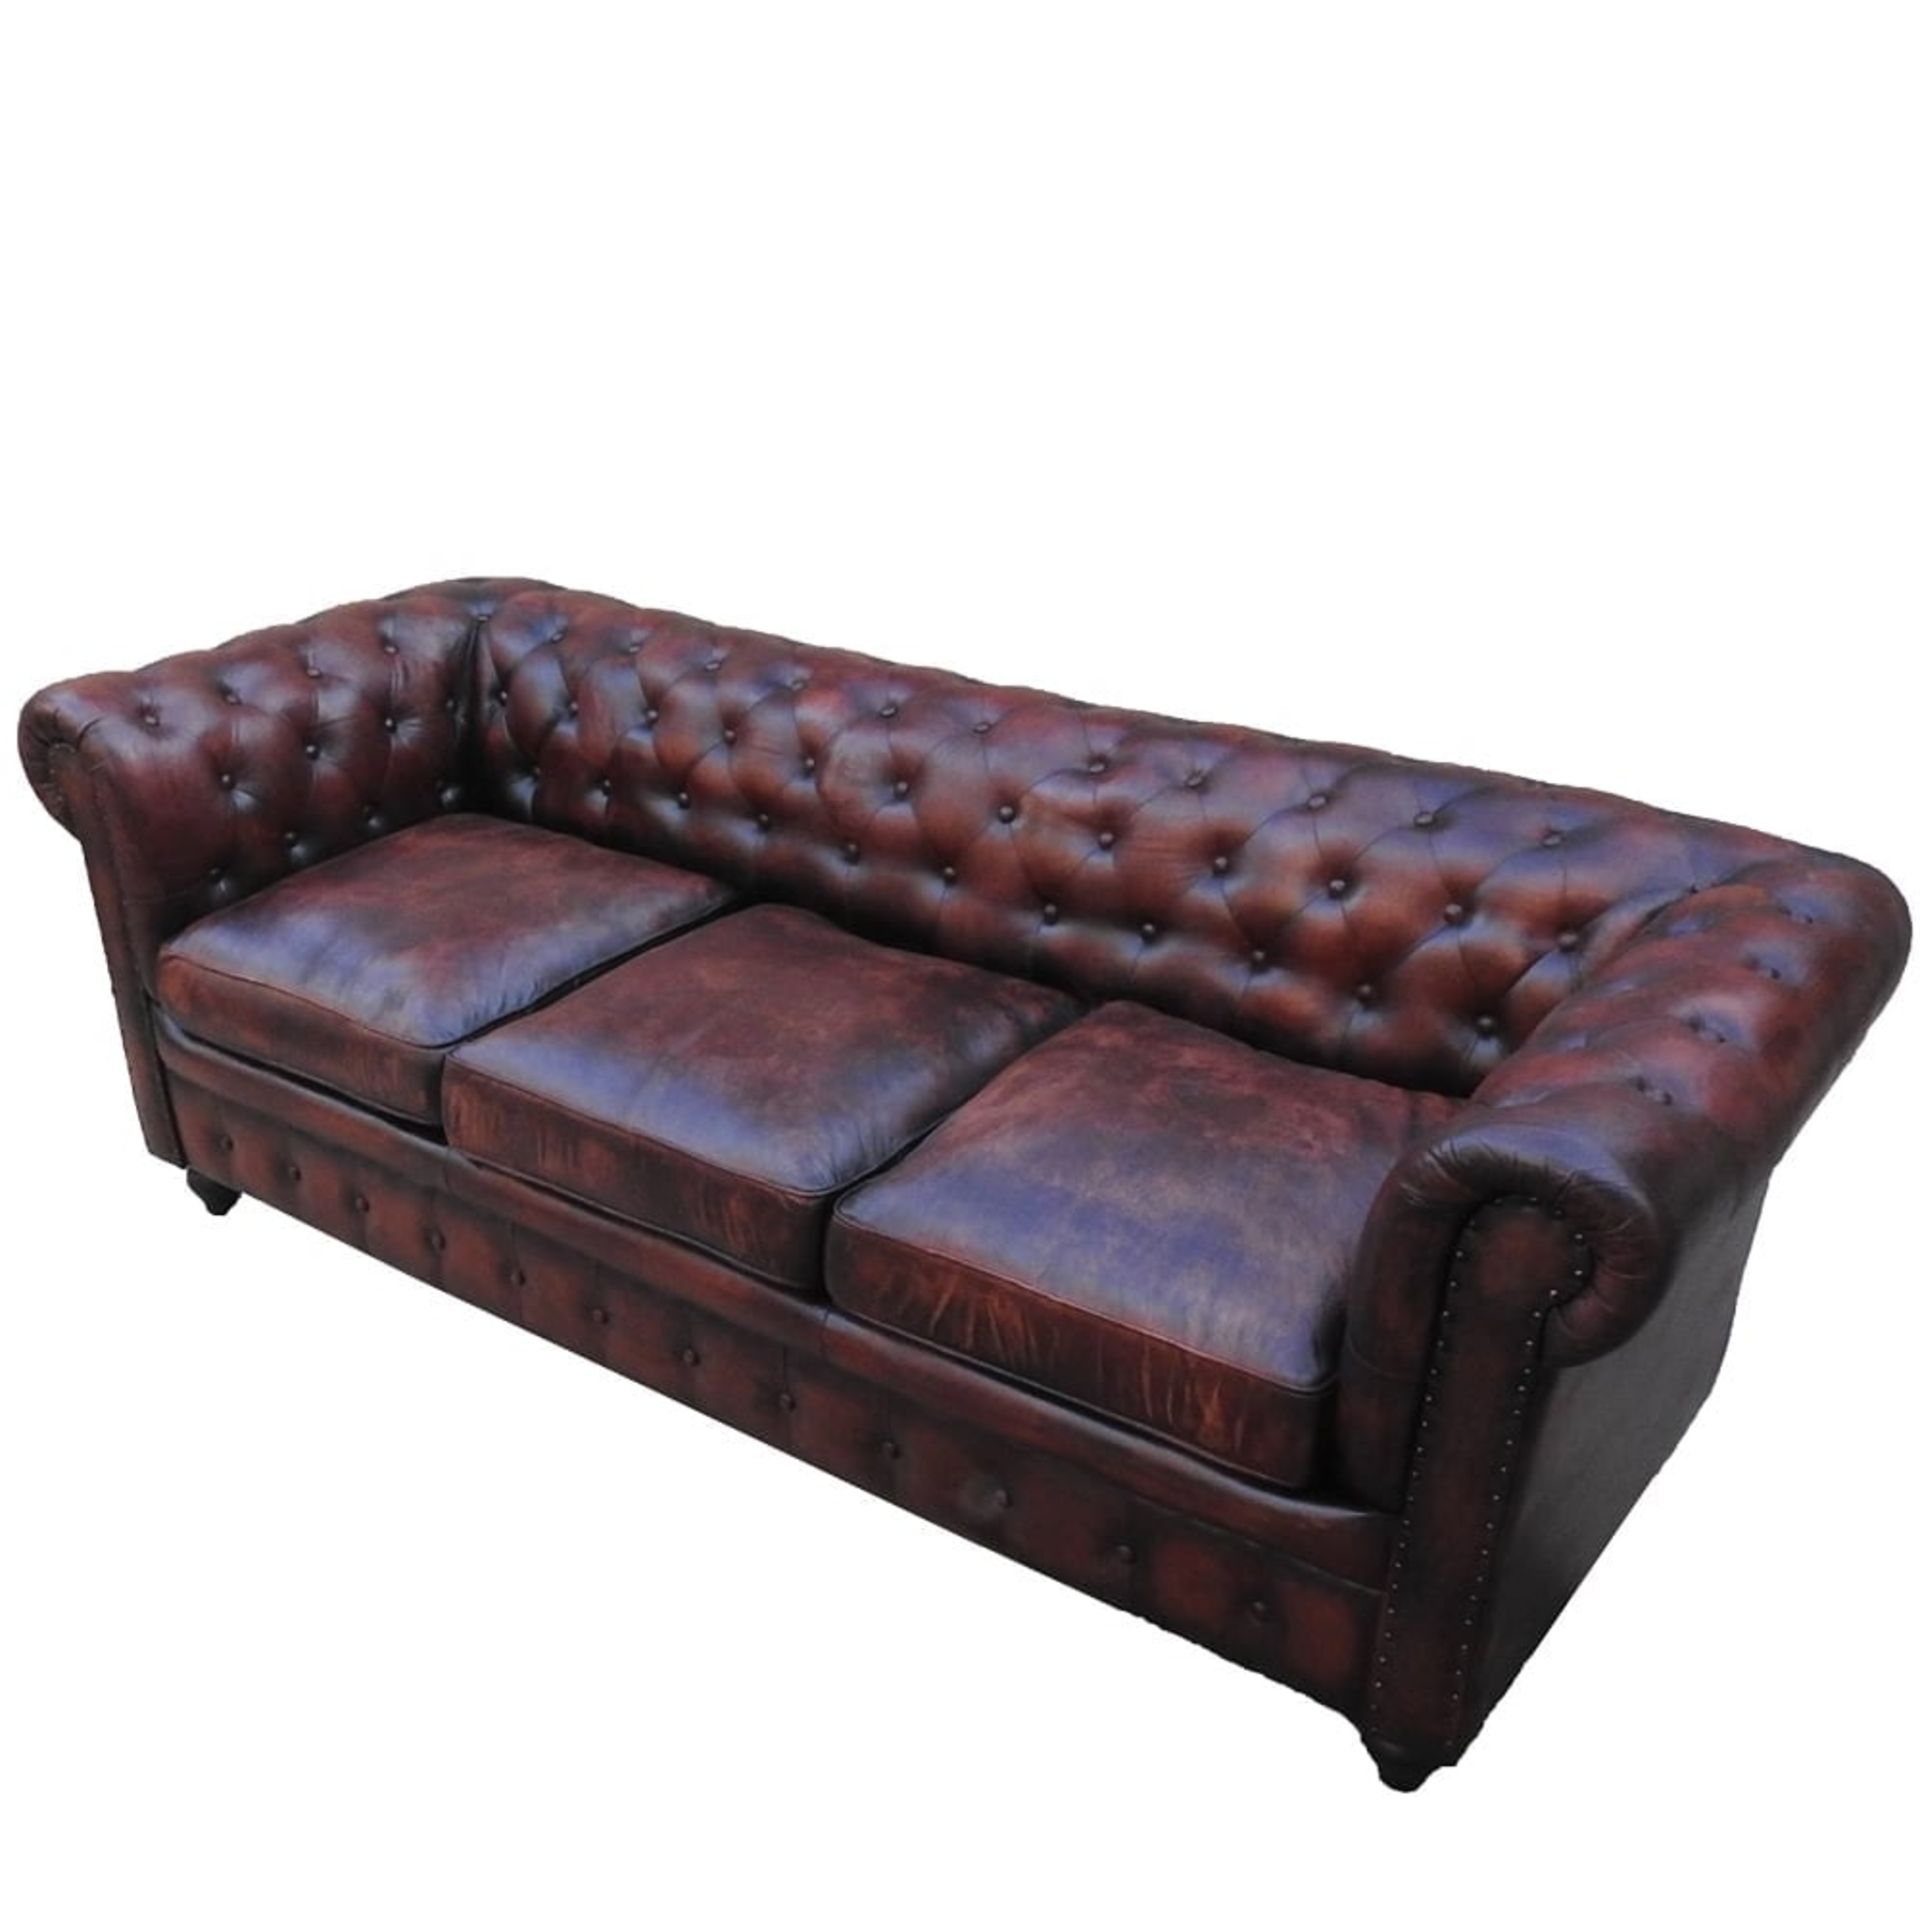 Shoreditch Leather Chesterfield 3-Seater Sofa Handmade - Brown - Image 5 of 6